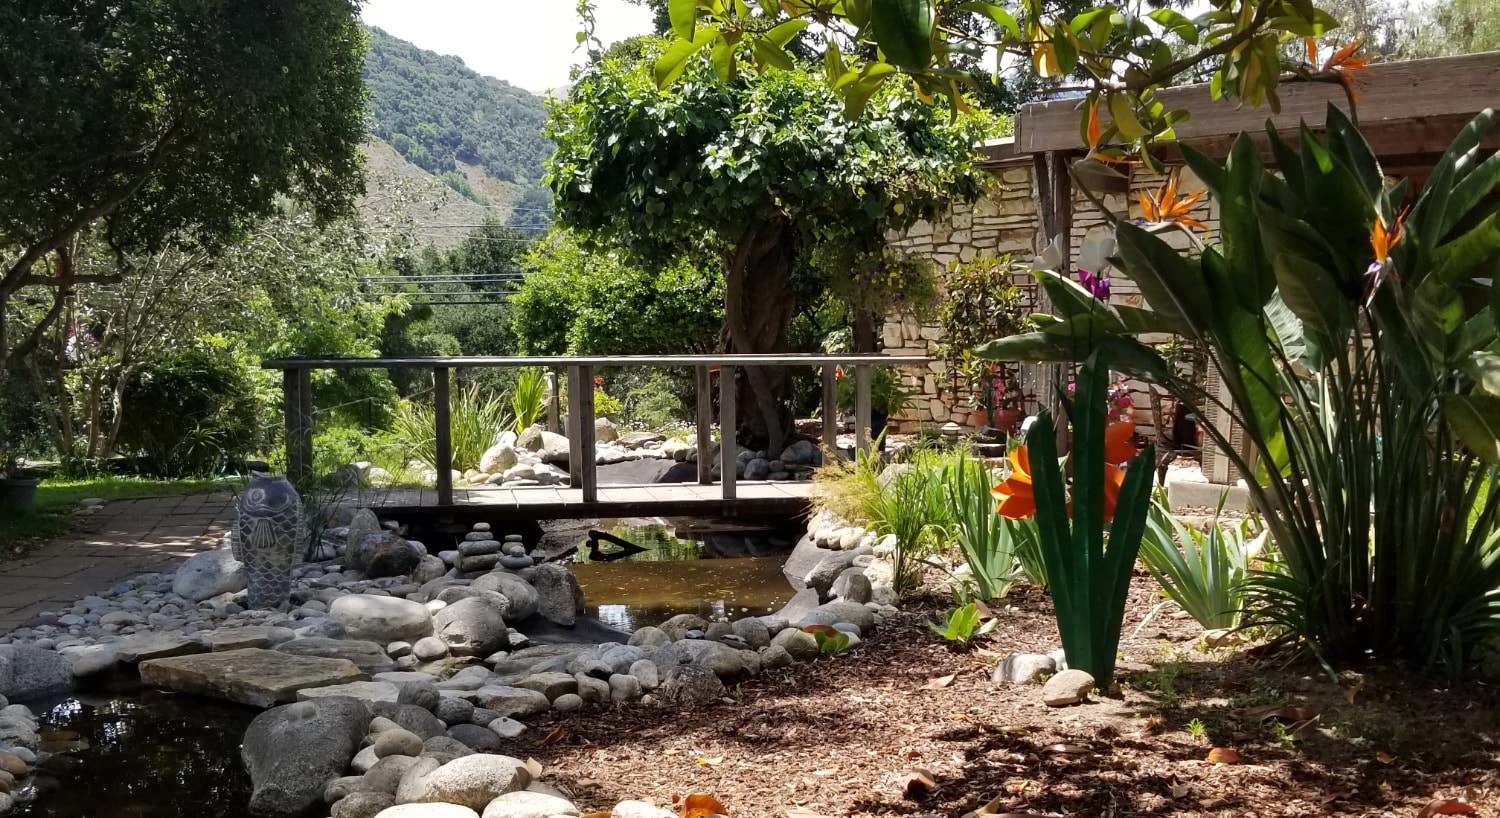 Wooden bridge over small stream surrounded by light gray stones and rocks next to lush garden with plants and orange flowers